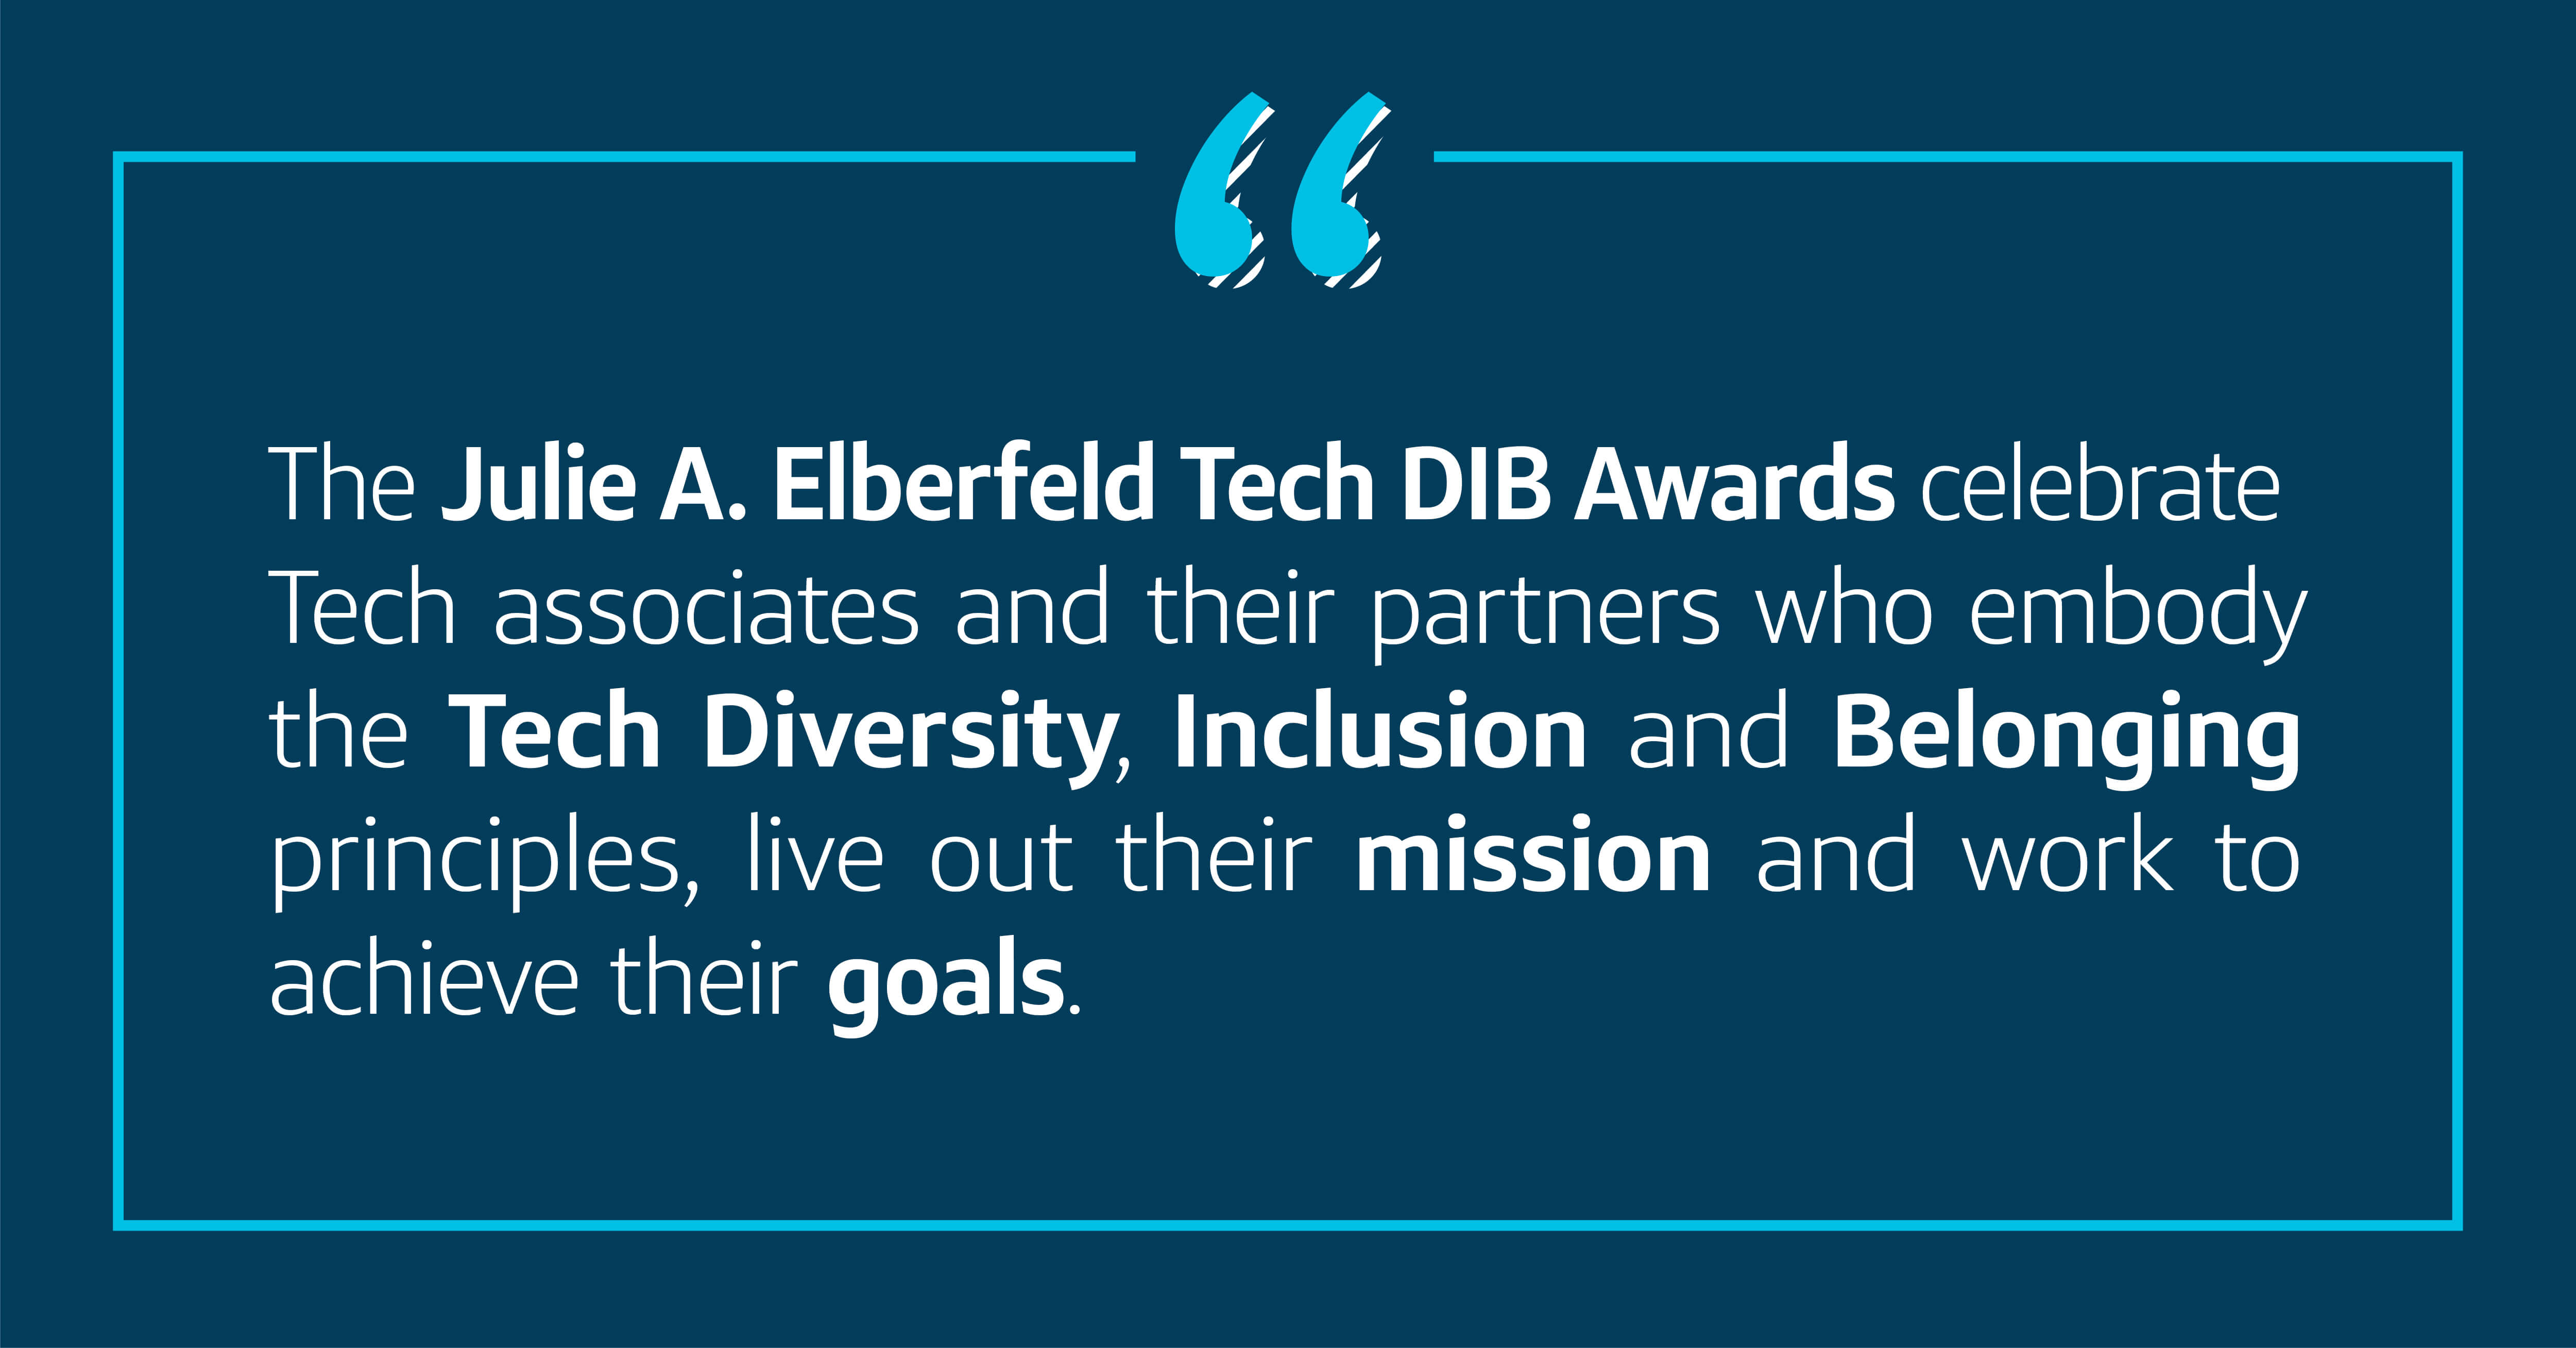 The Julie E. Elberfeld Tech DIB Awards celebrate Tech associates and their partners who embody Tech Diversity, Inclusion and Belonging principles, live out their mission and work to achieve their goals